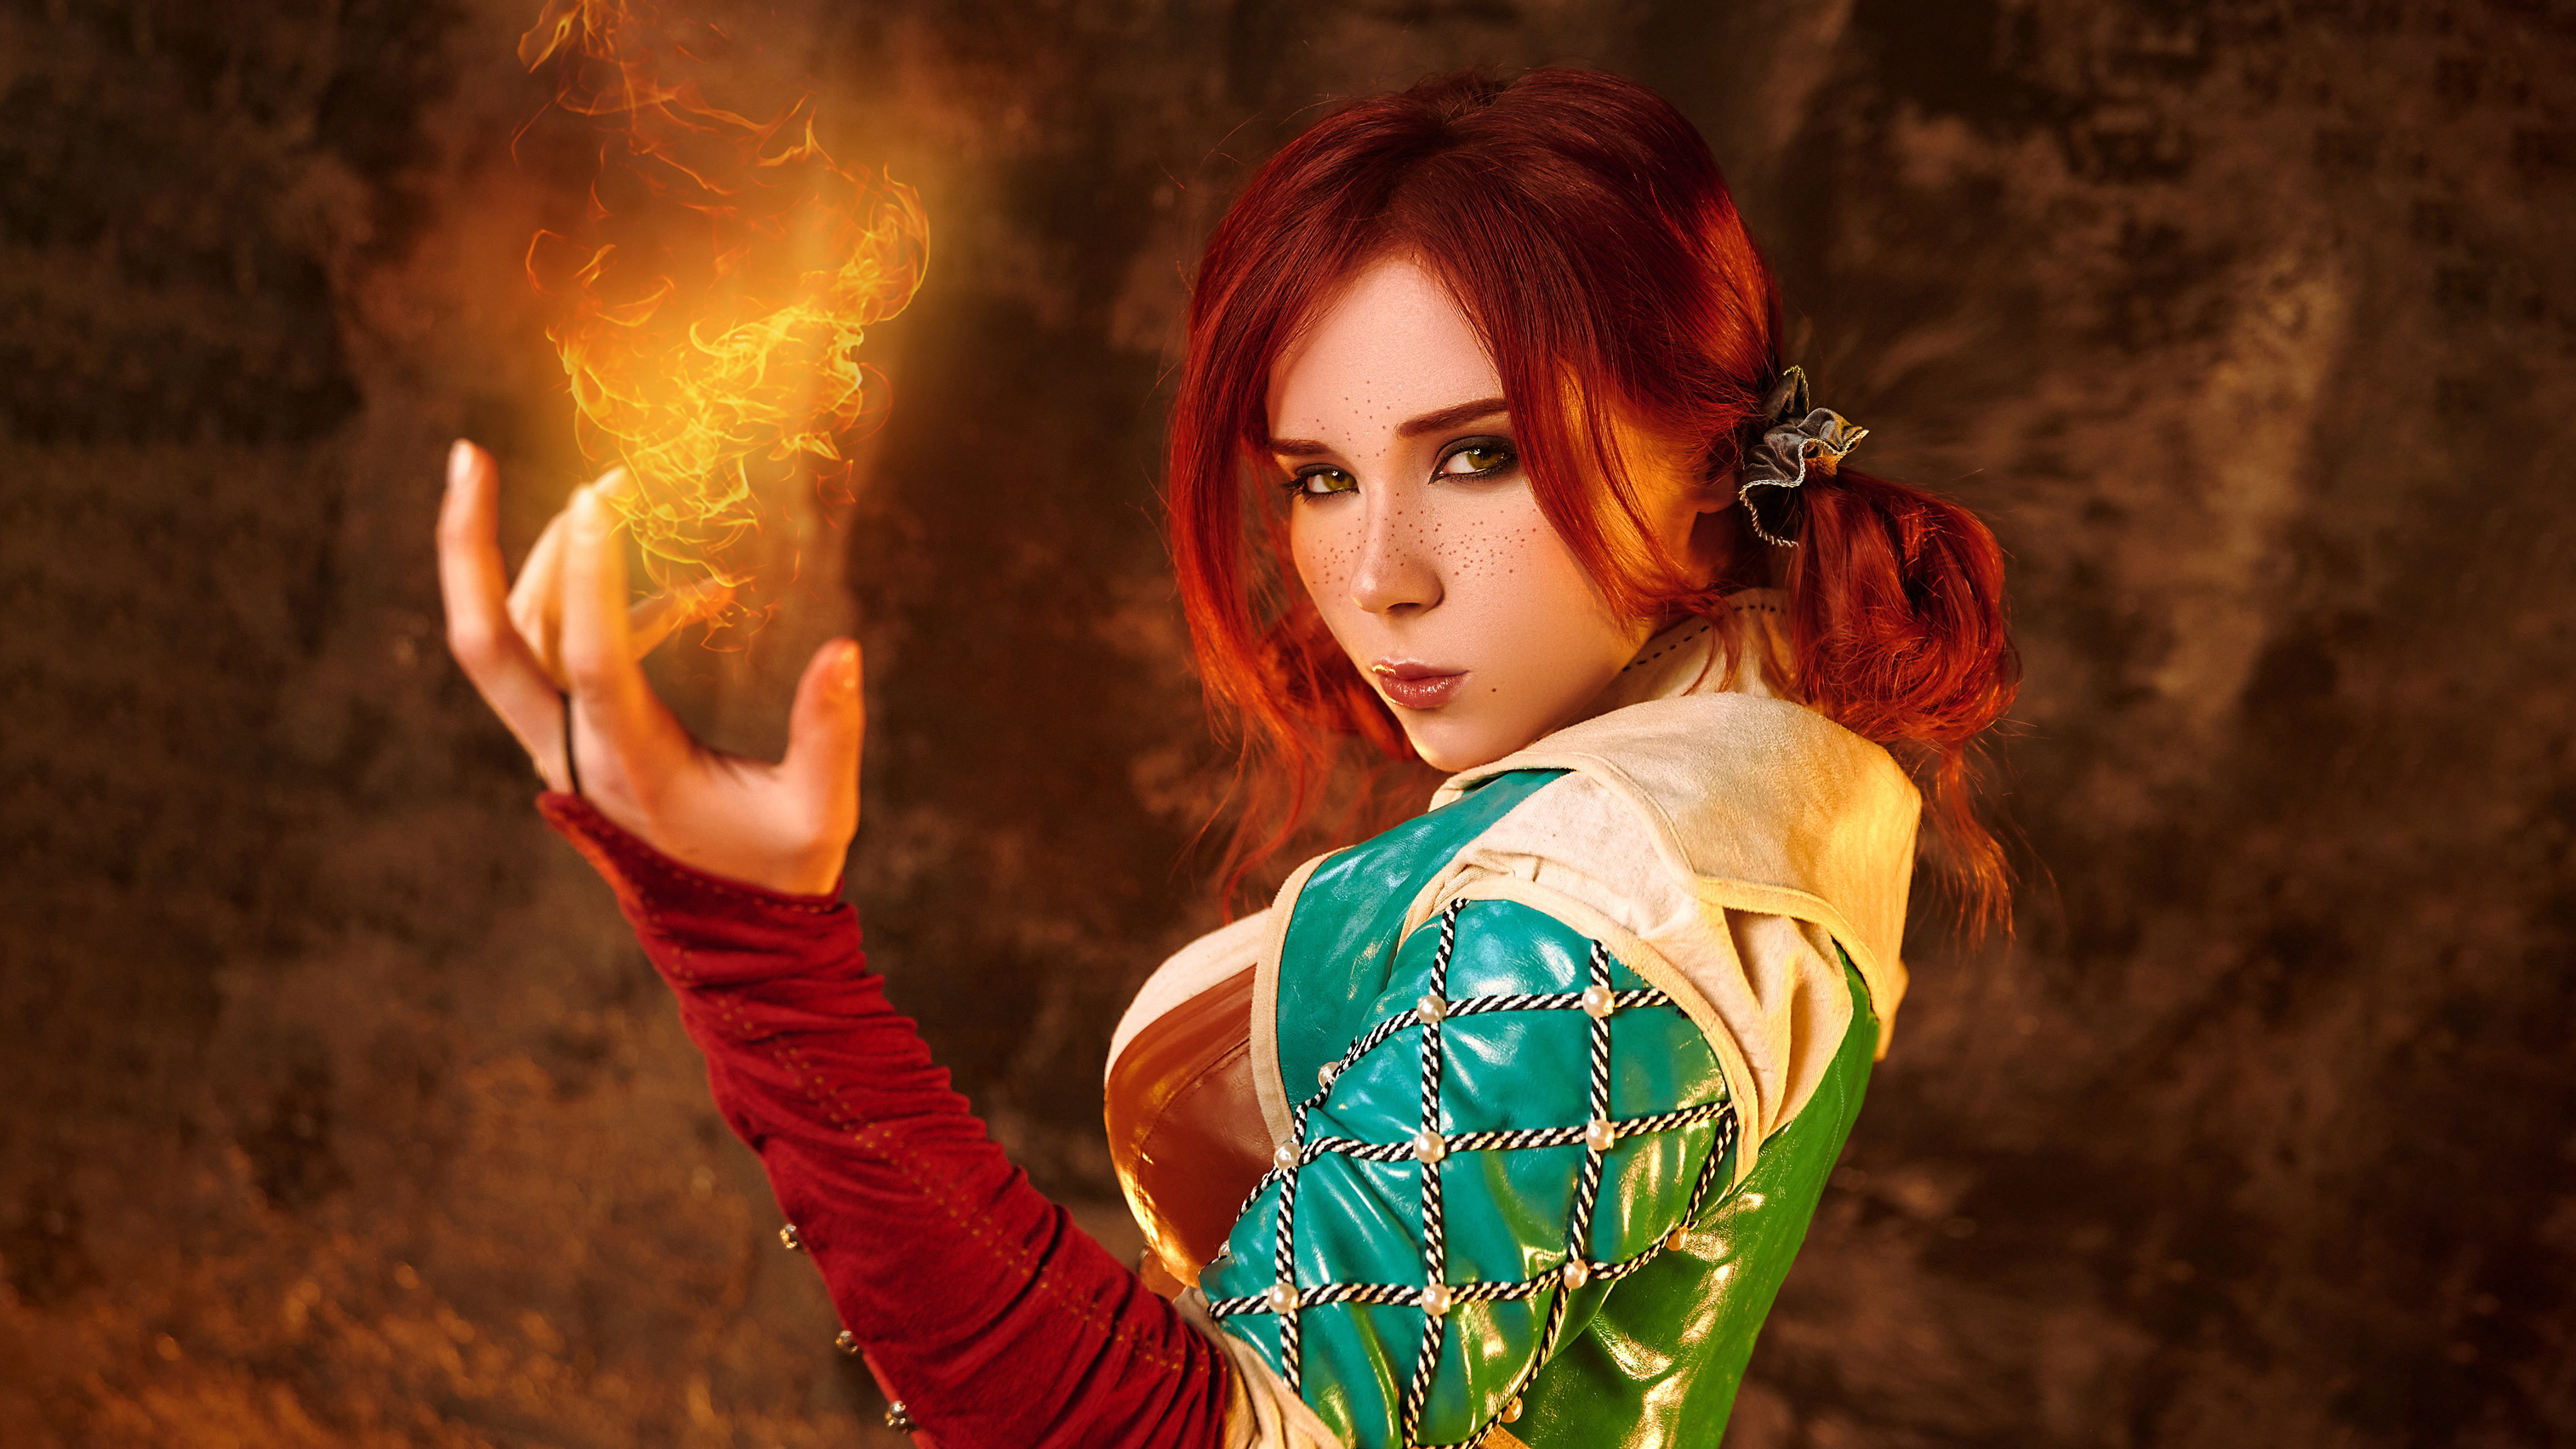 Triss Merigold with Magic Fire  The Witcher 3 Wild Hunt  Live Background   Live Desktop Wallpapers